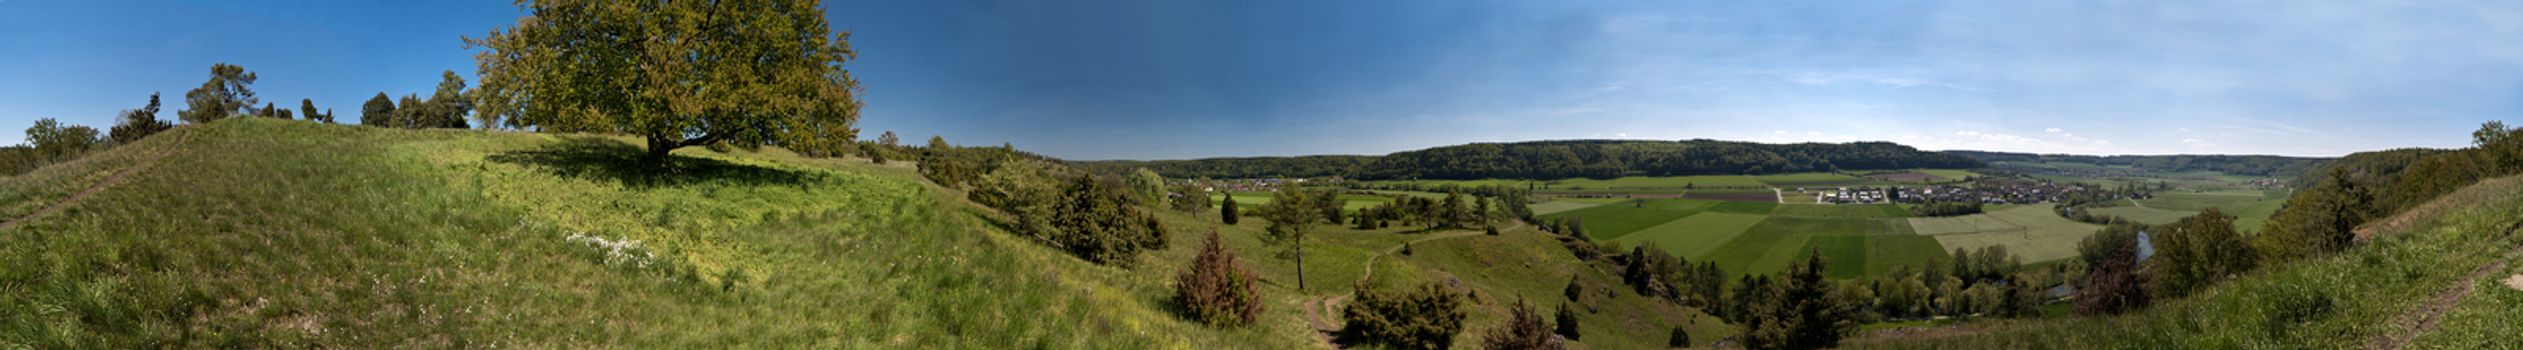 Panoramic View of the Altmuehltal in Germany